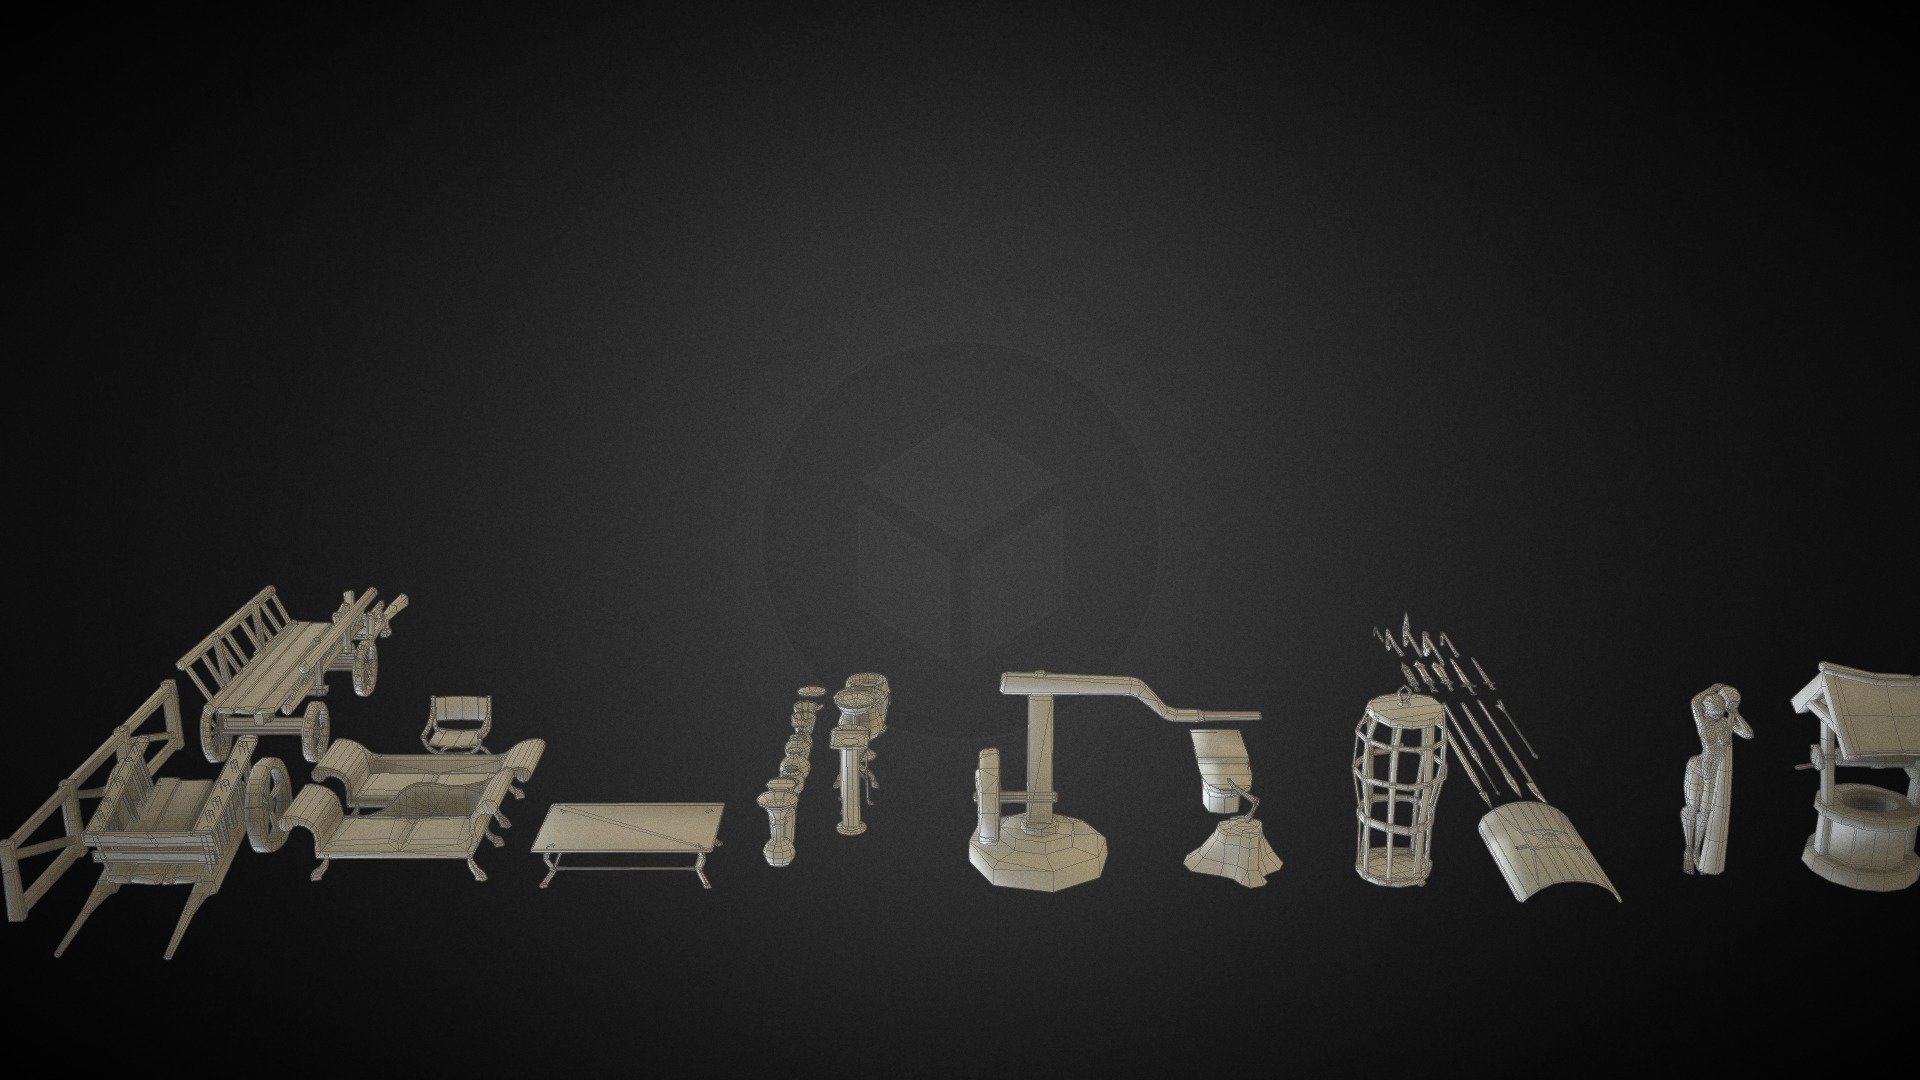 This is the collection of props made for the Roman Villa Scene
There are around 100 props, big and small 3d model